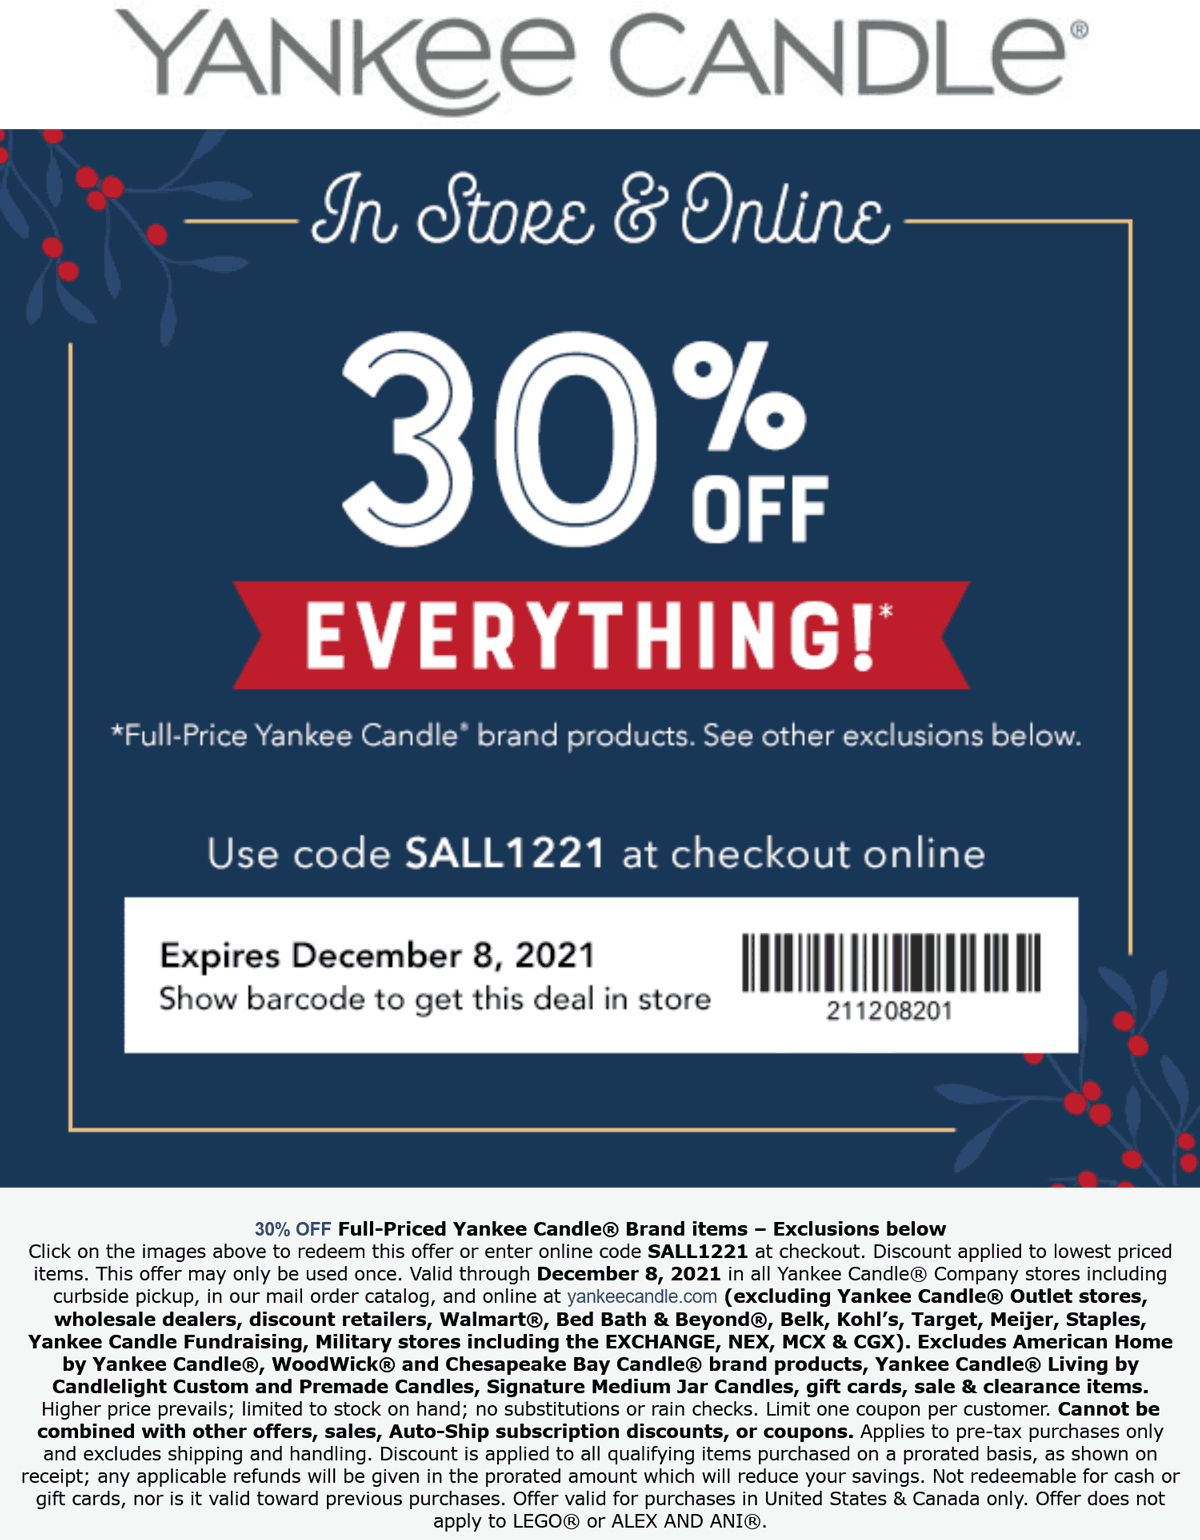 Yankee Candle stores Coupon  30% off everything at Yankee Candle, or online via prom ocode SALL1221 #yankeecandle 